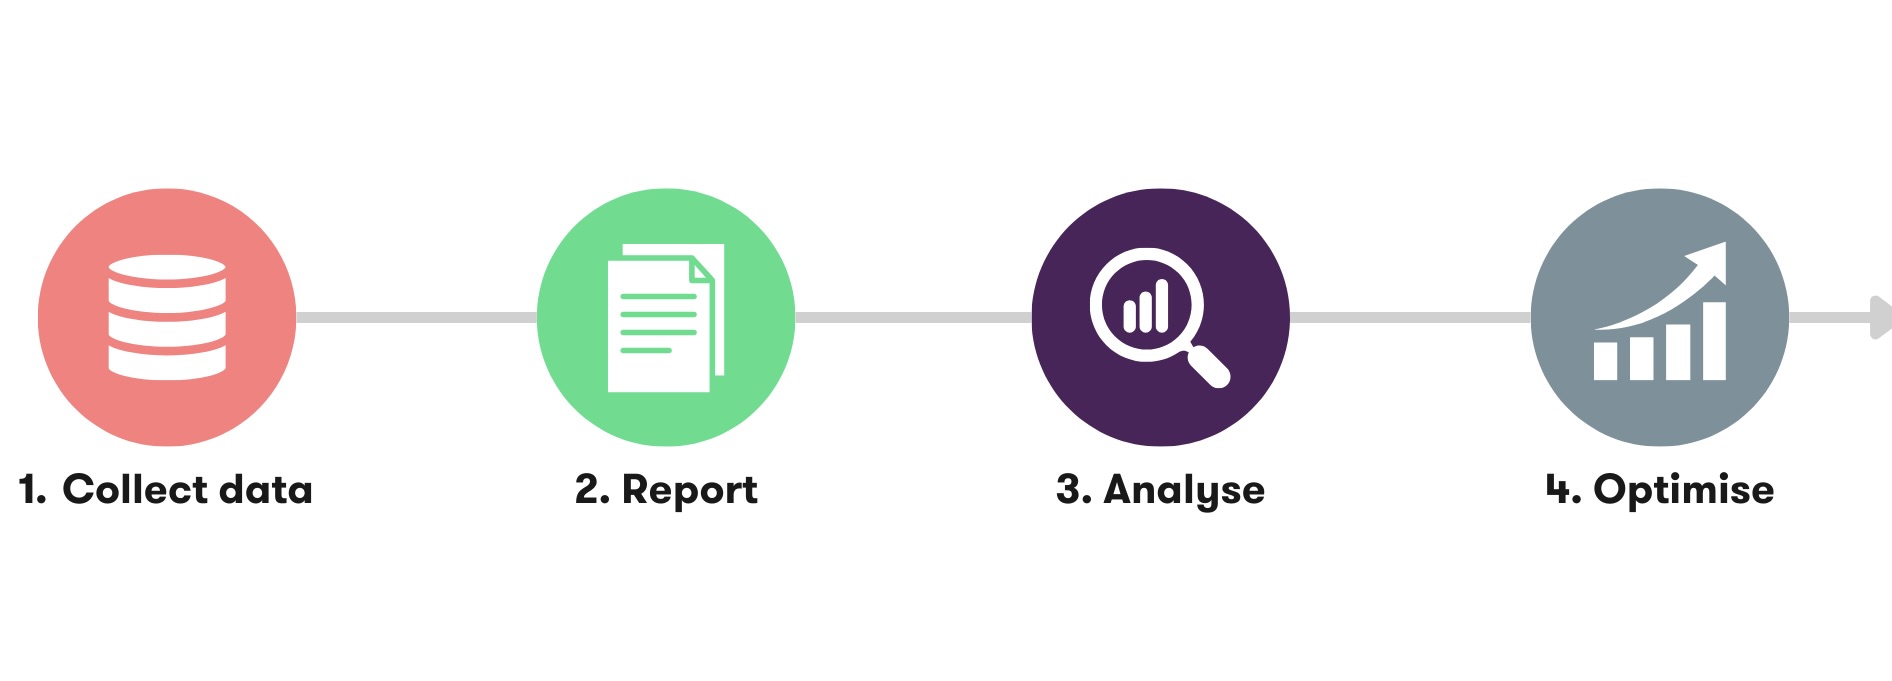 The illustration shows how companies should proceed in four steps in order to utilise web analytics.